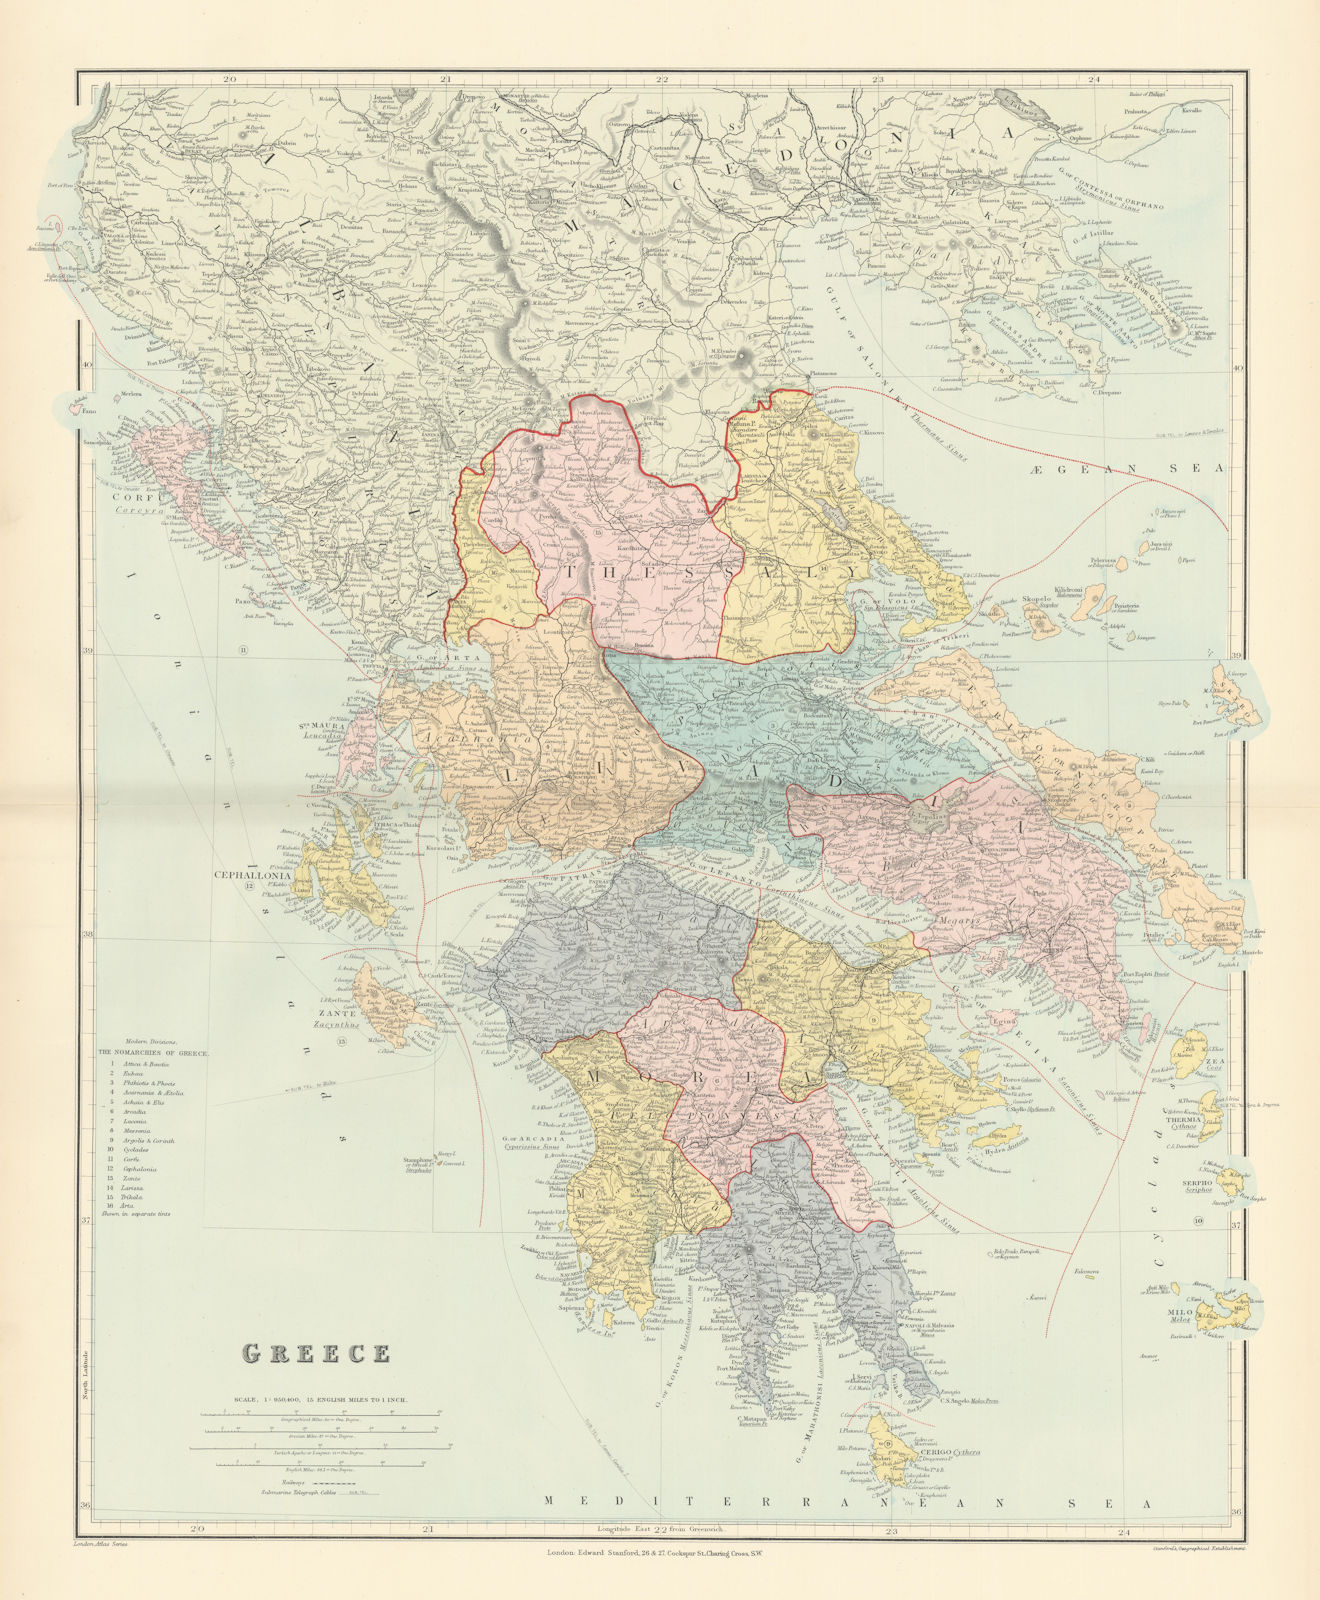 Associate Product Greece. Nomarchies. Ionian Sporades Cyclades Morea Livadia. STANFORD 1896 map